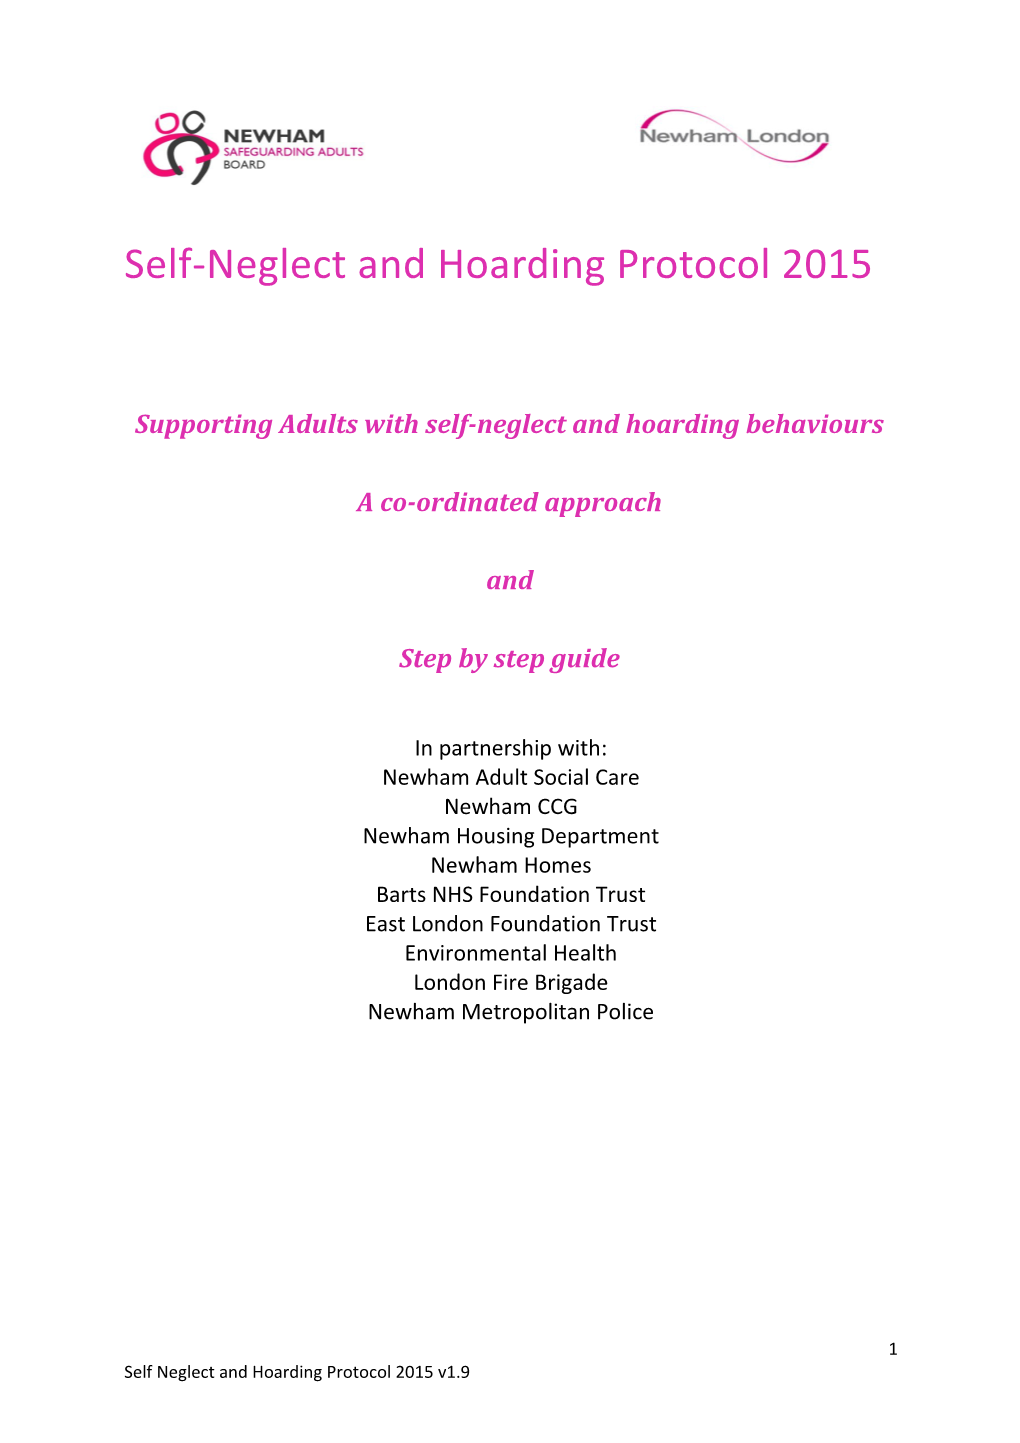 Supporting Adults with Self-Neglect and Hoarding Behaviours